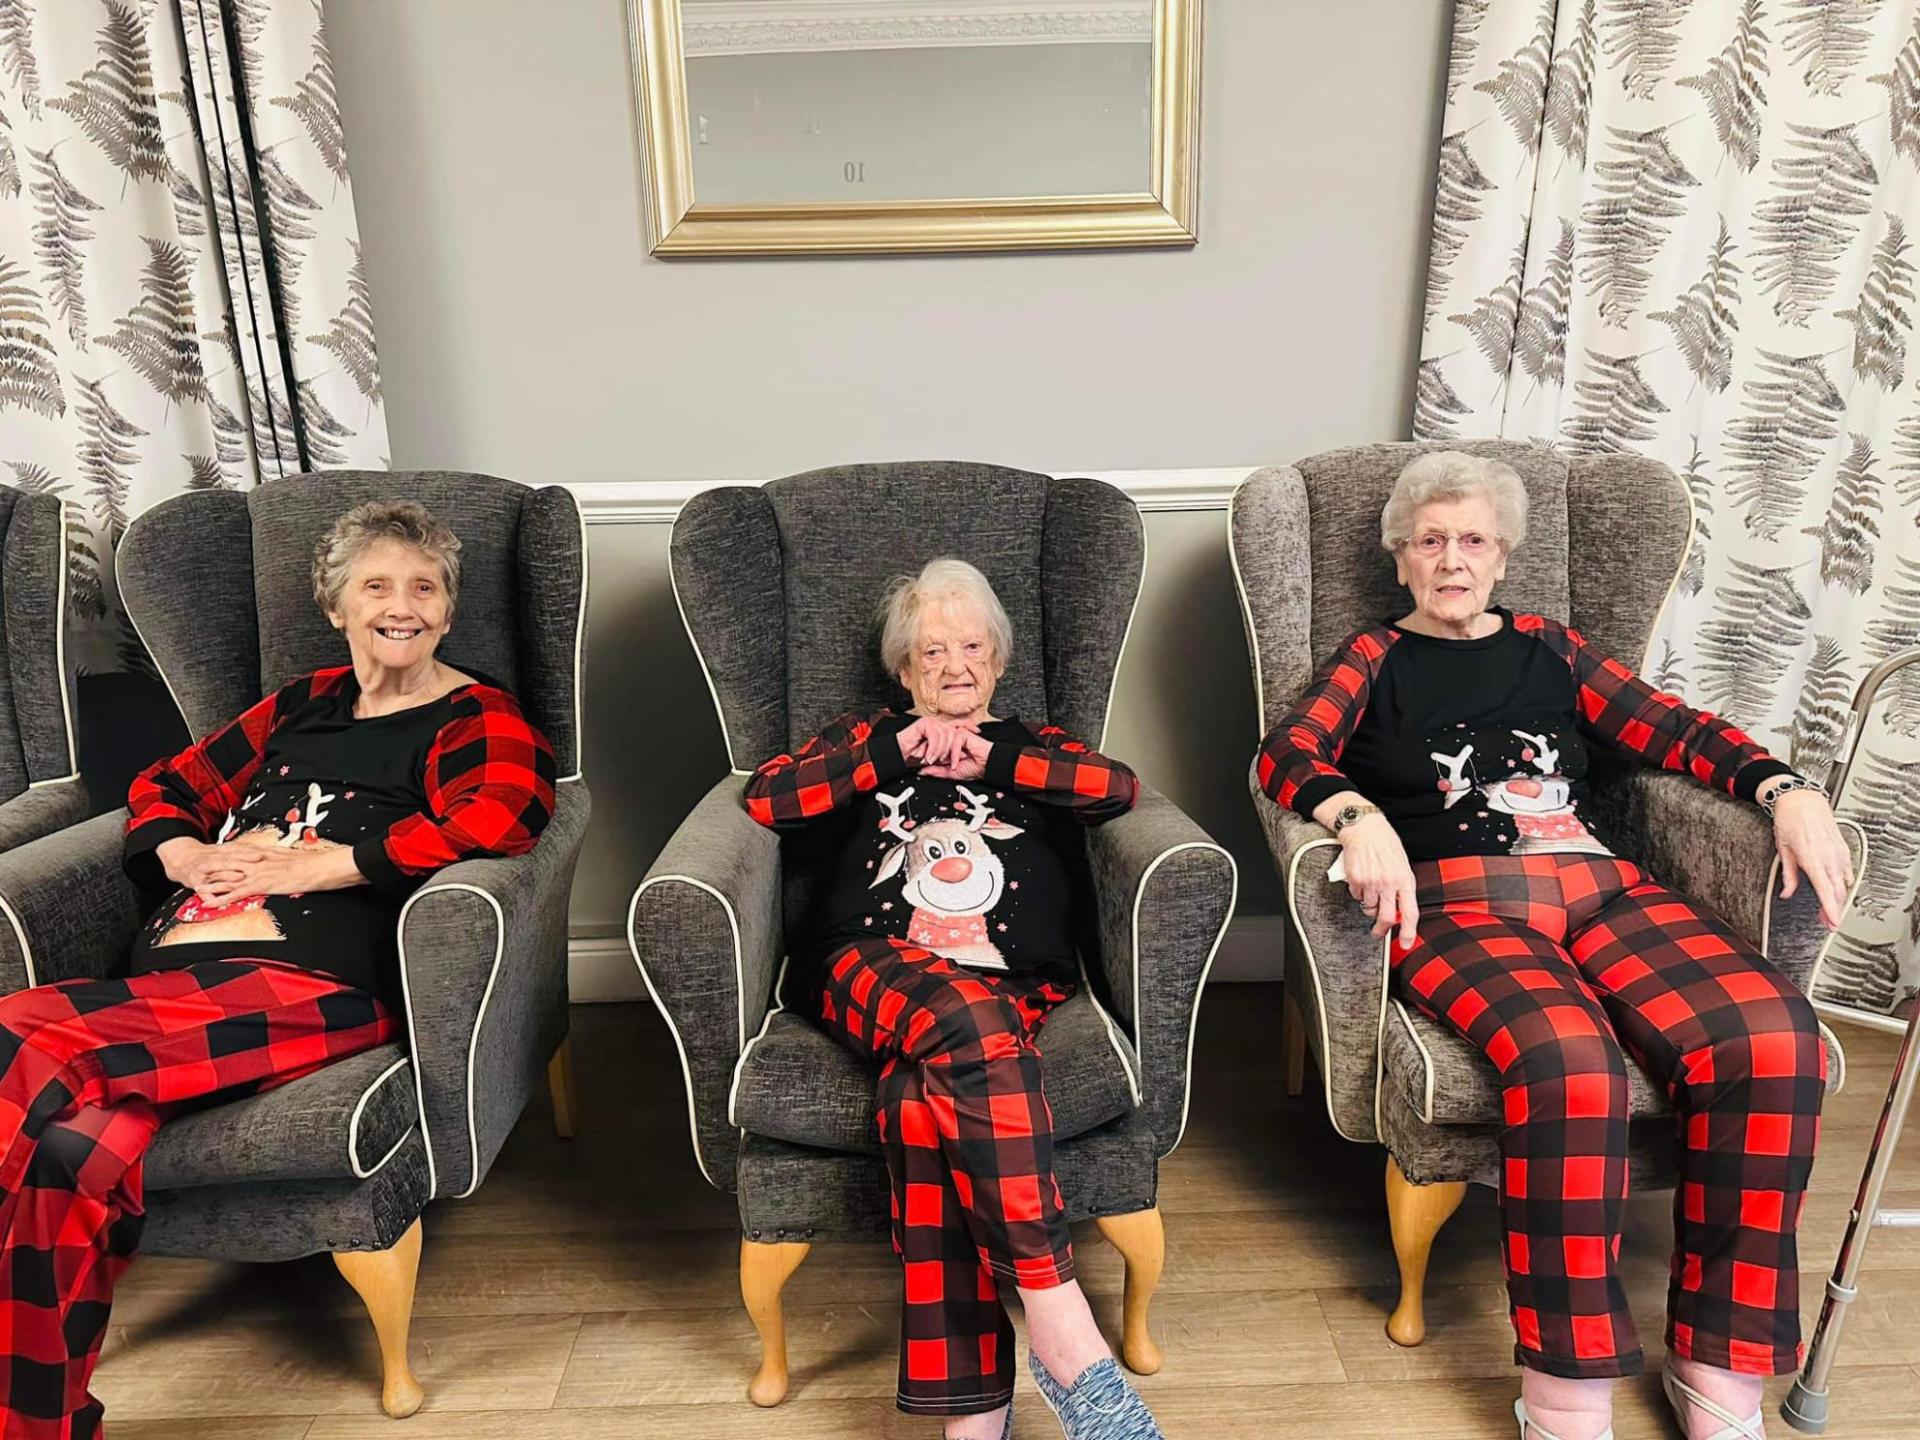 Residents at Archers Park Care Home in Sunderland